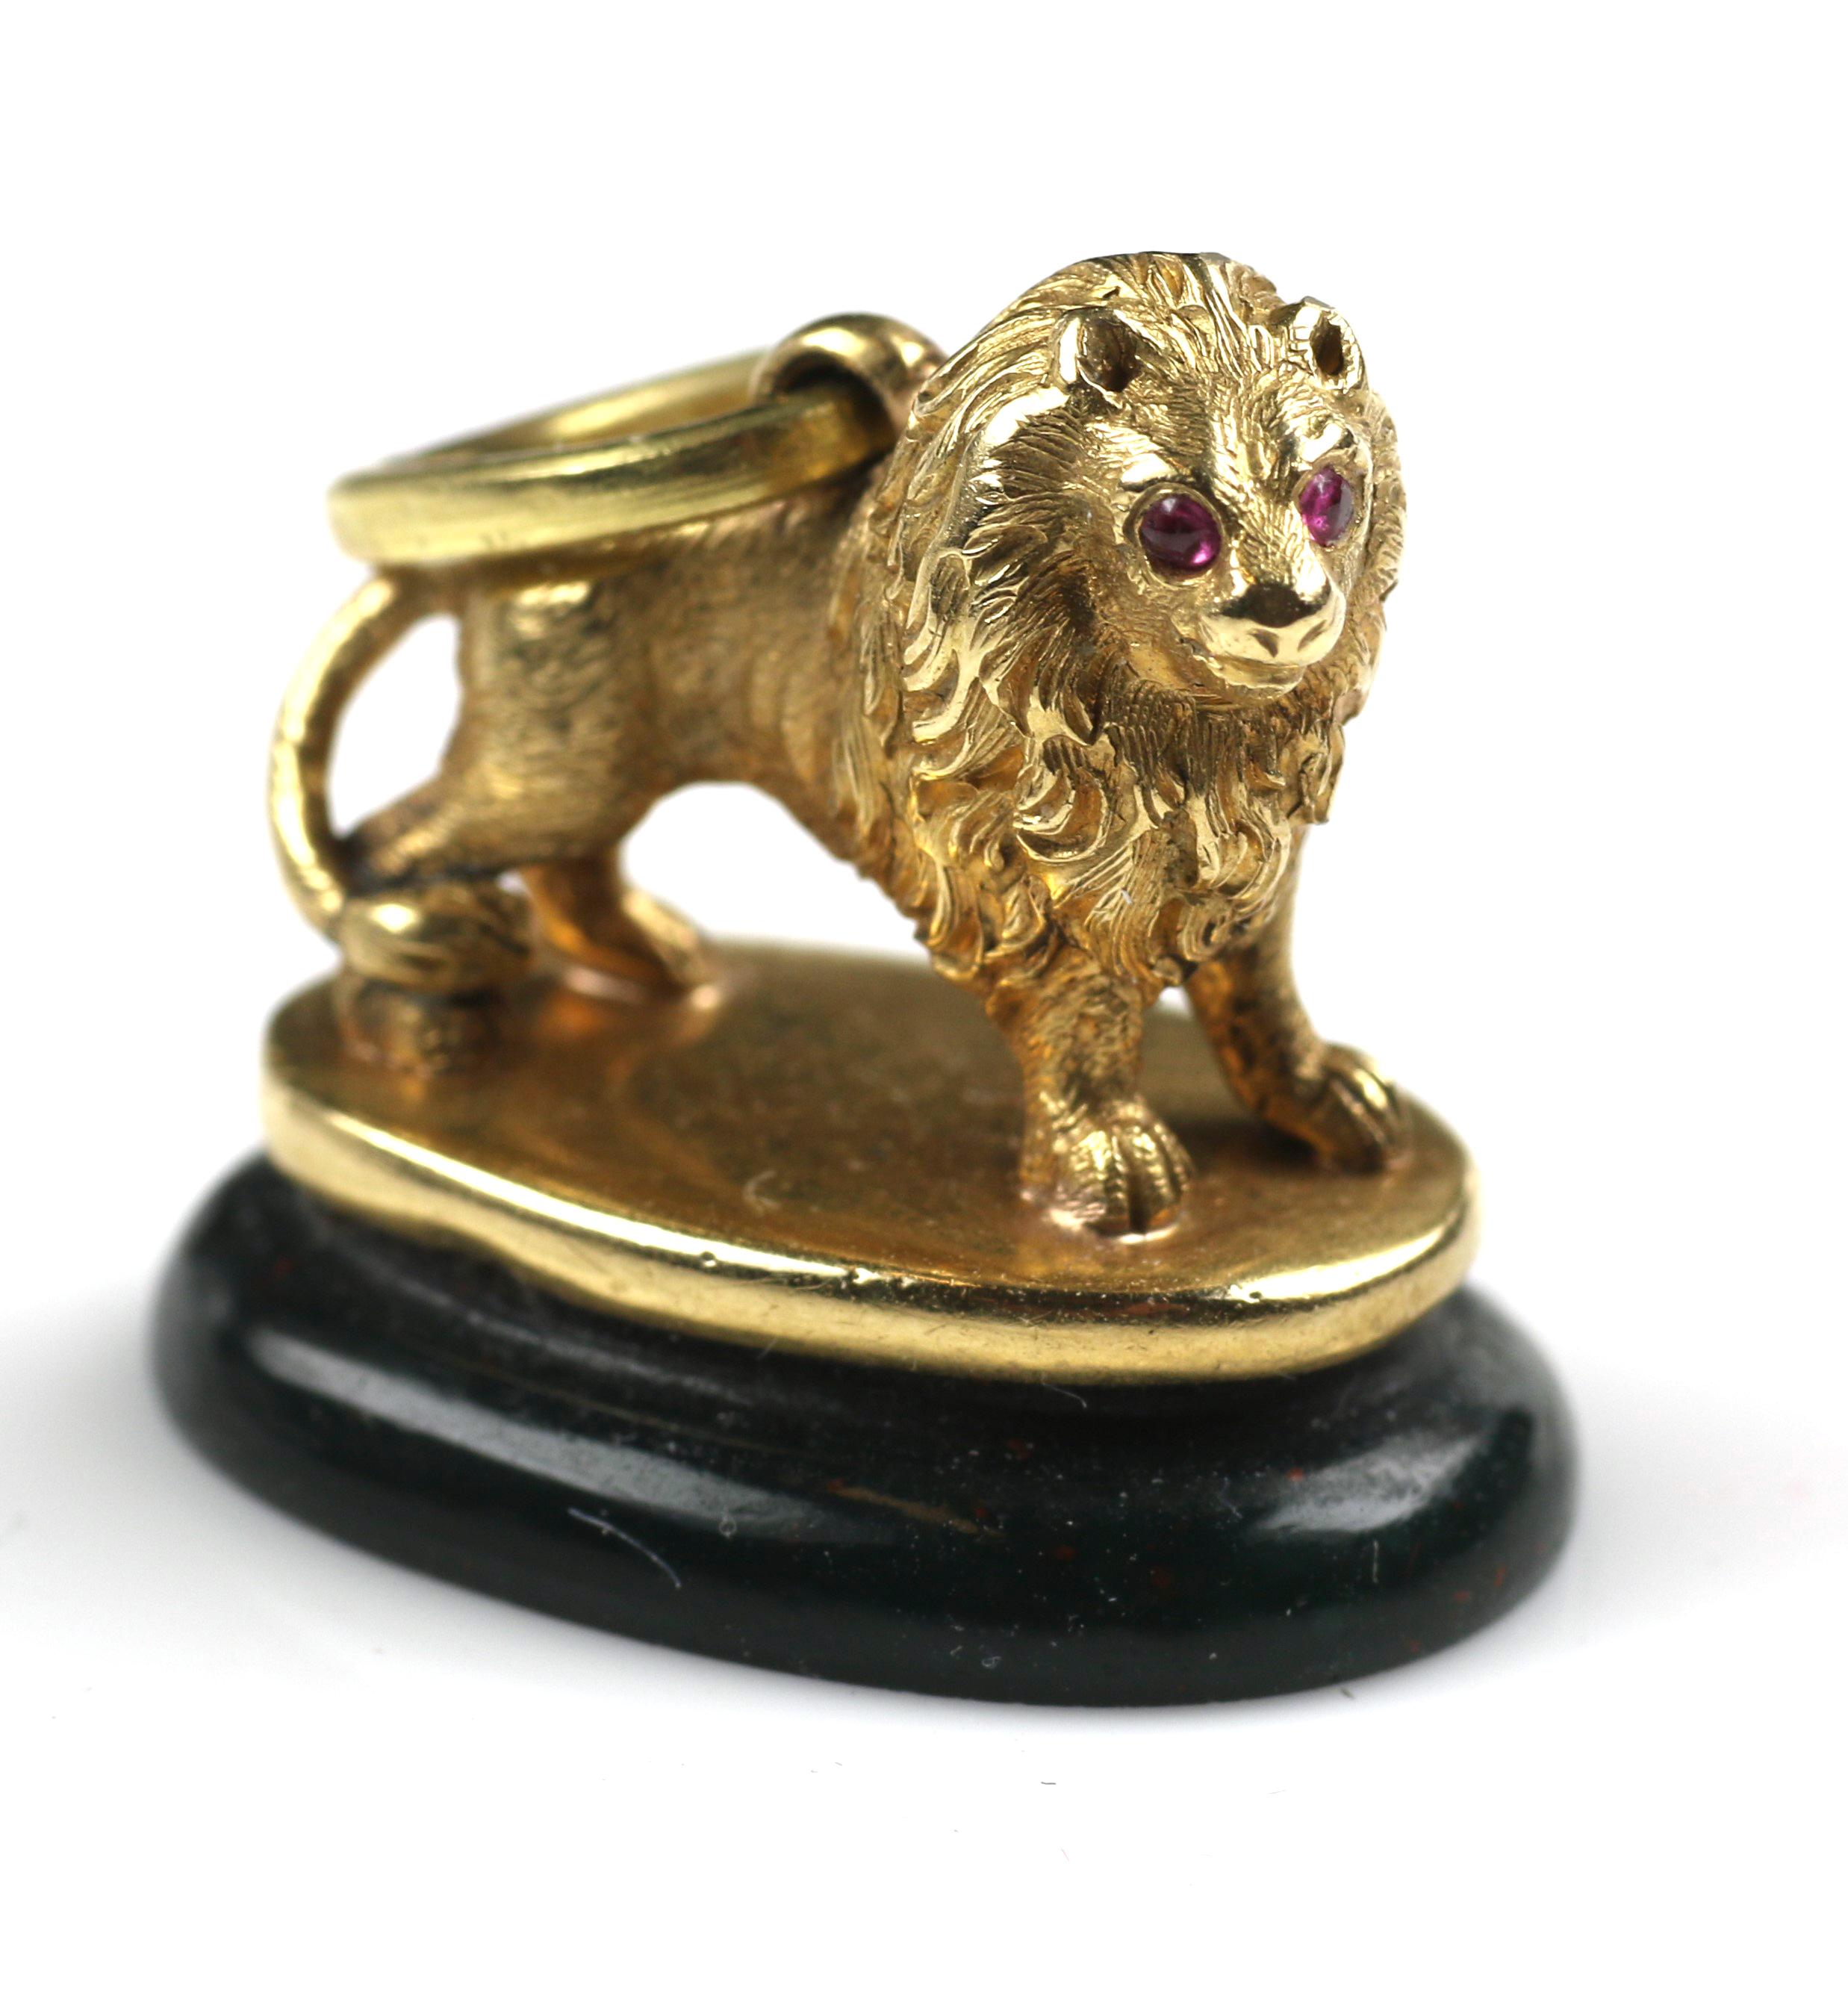 Antique Heliotrope Seal Fob Pendant with 18K Gold Lion For Sale 2